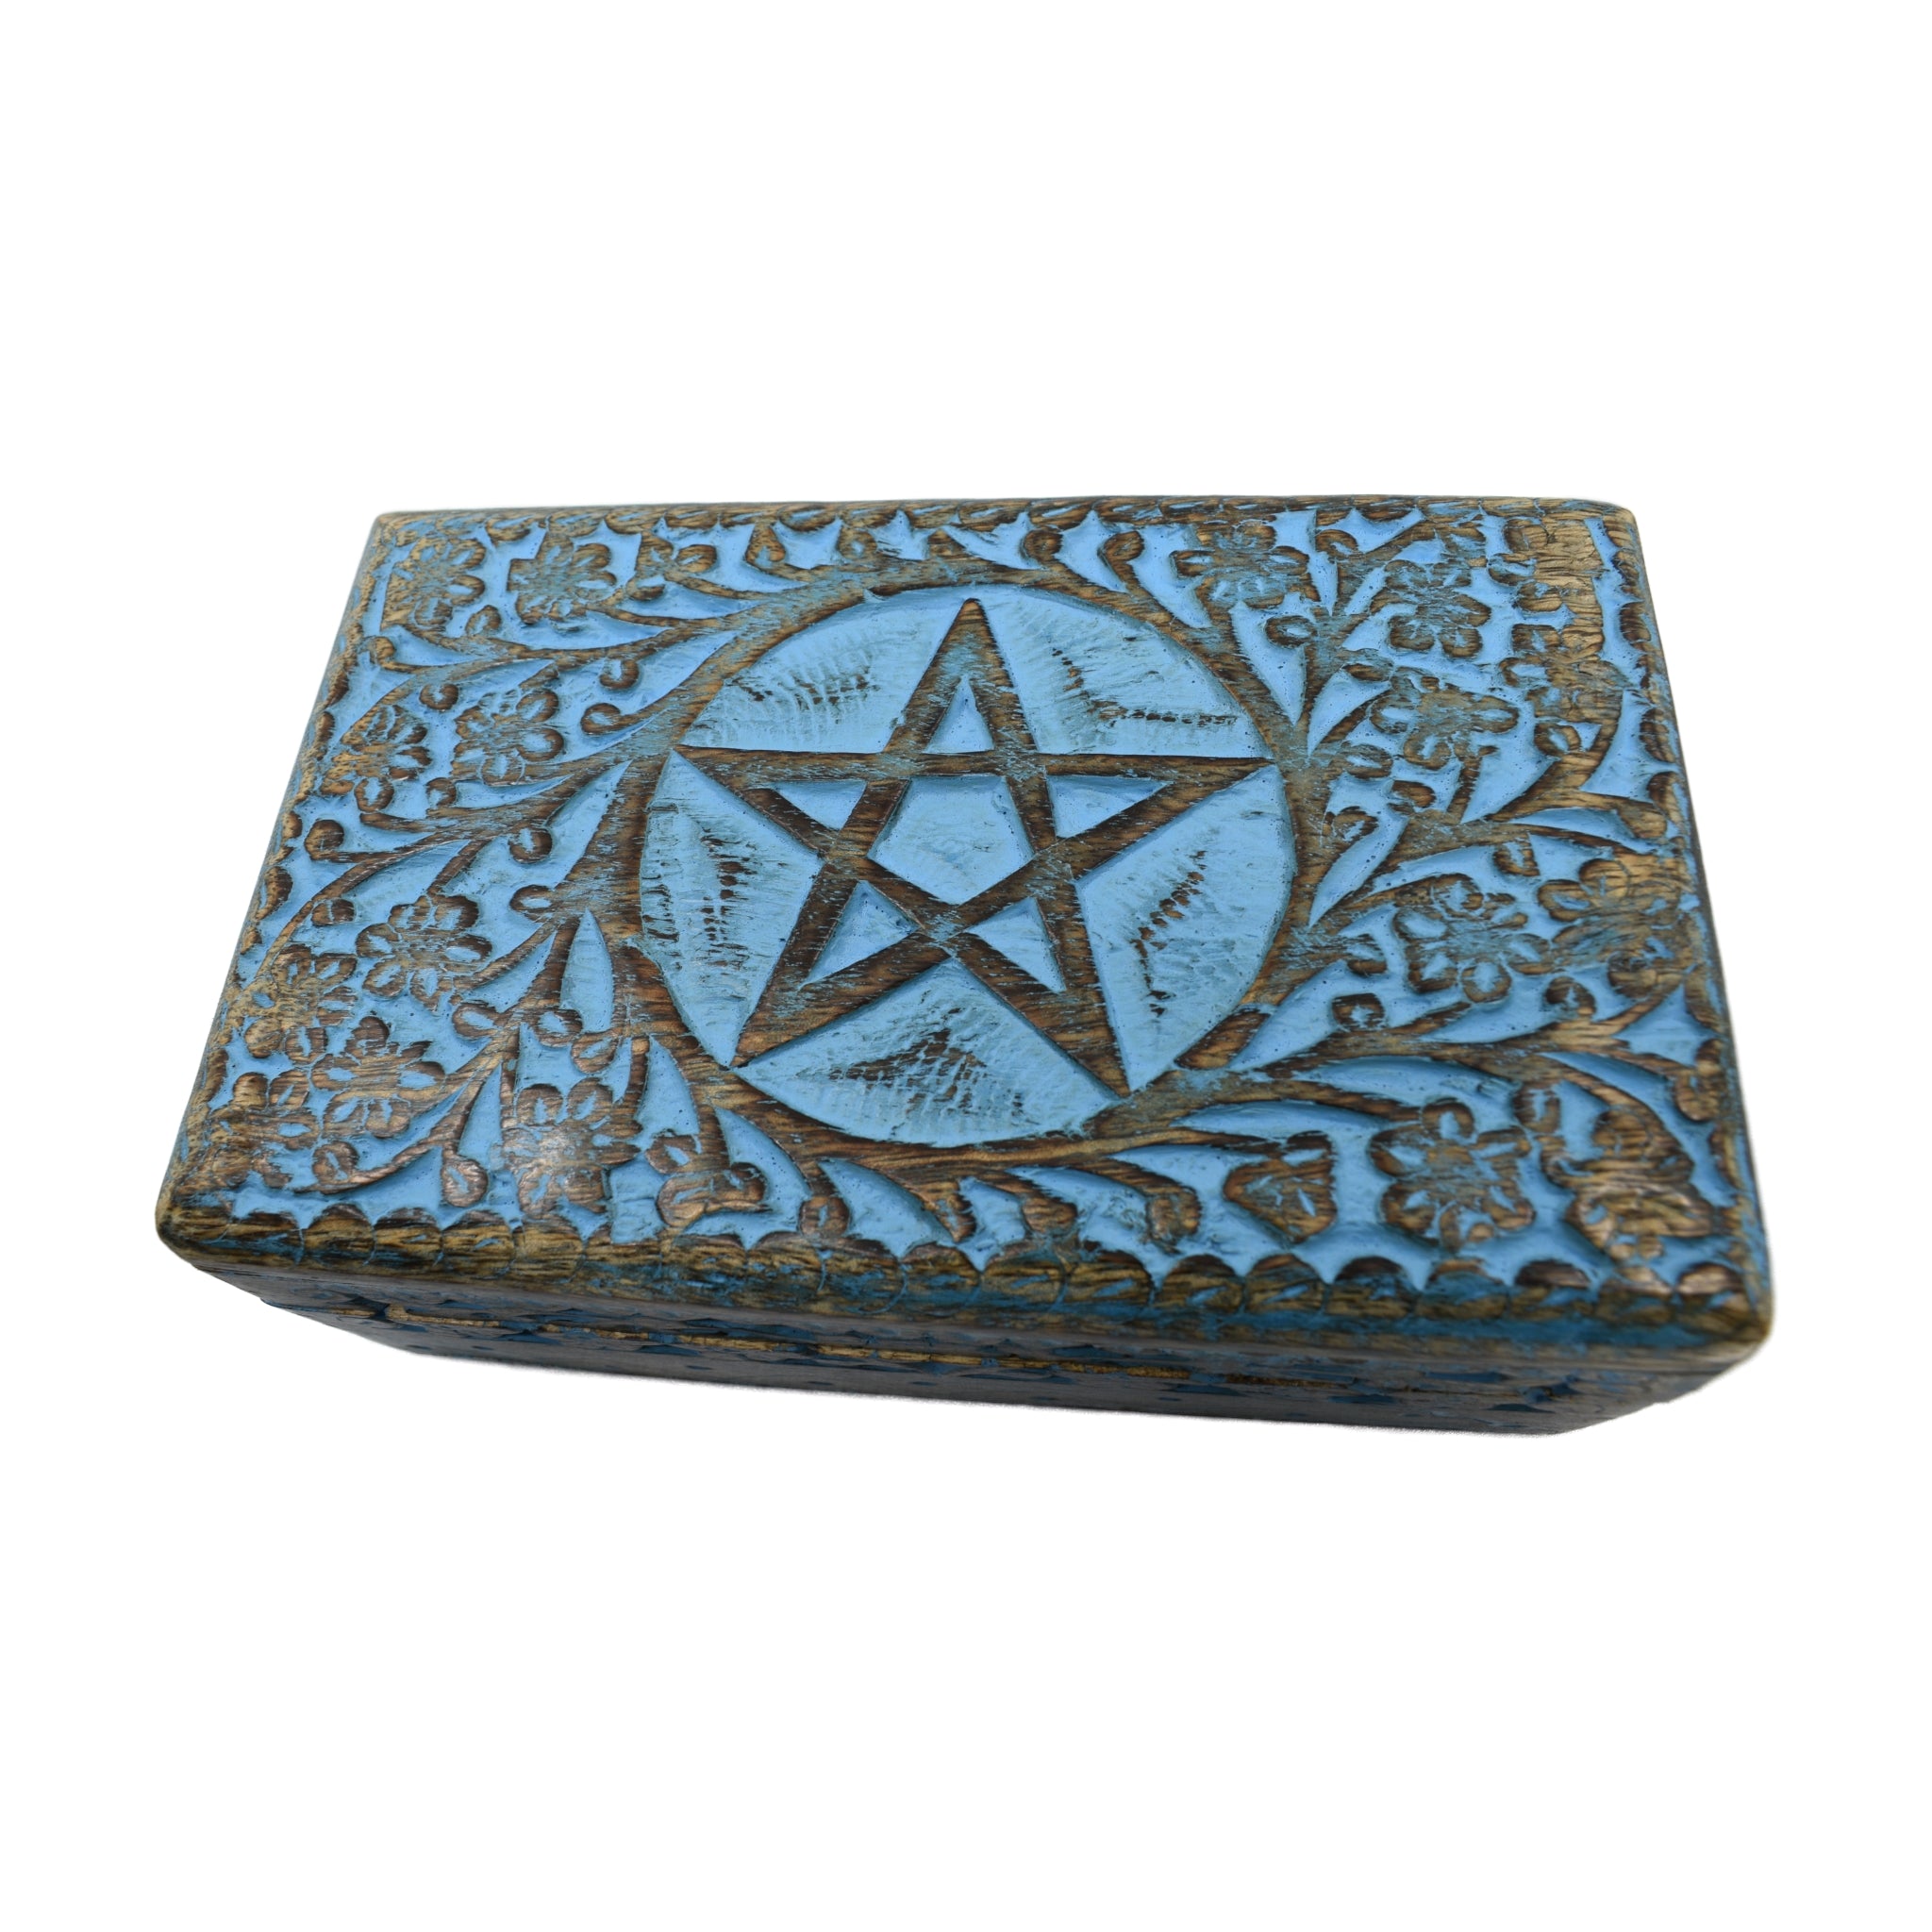 wood box blue pain carved pentacle with floral design 